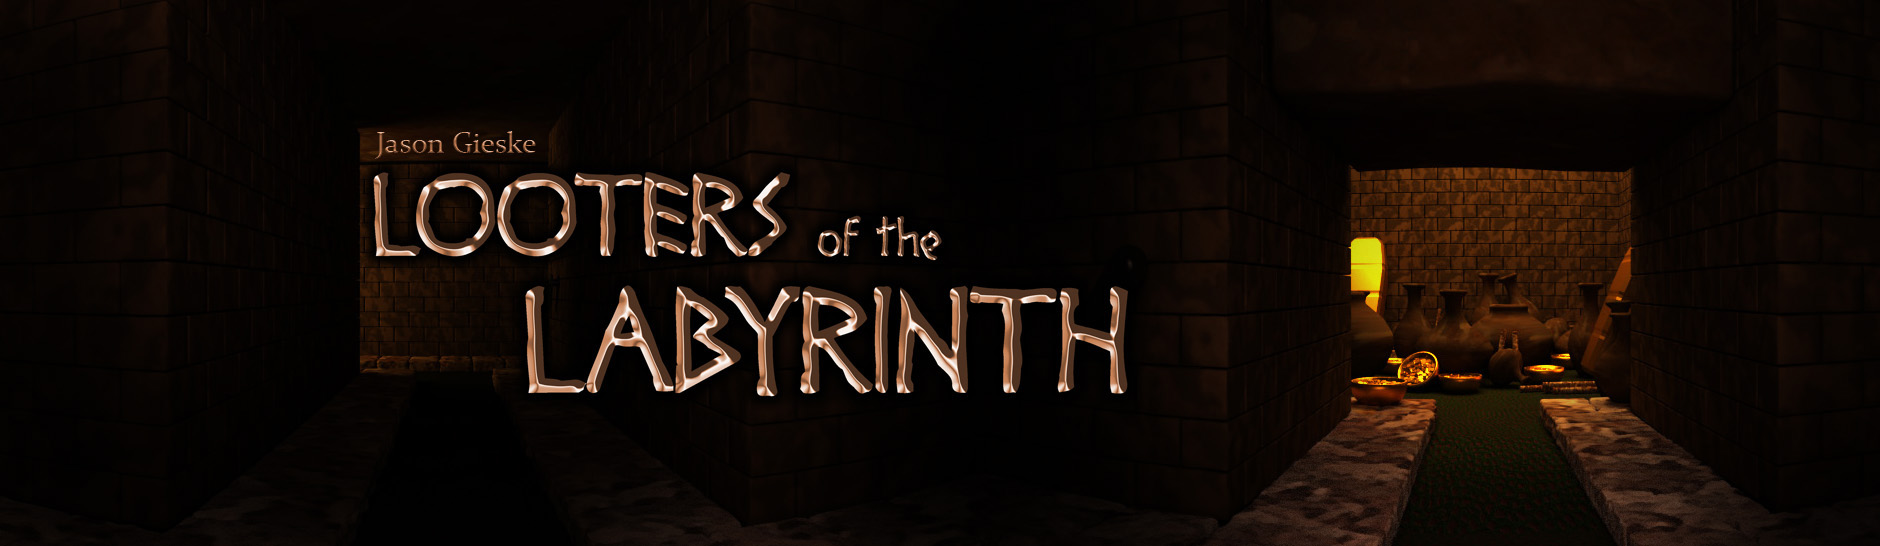 Looters of the Labyrinth